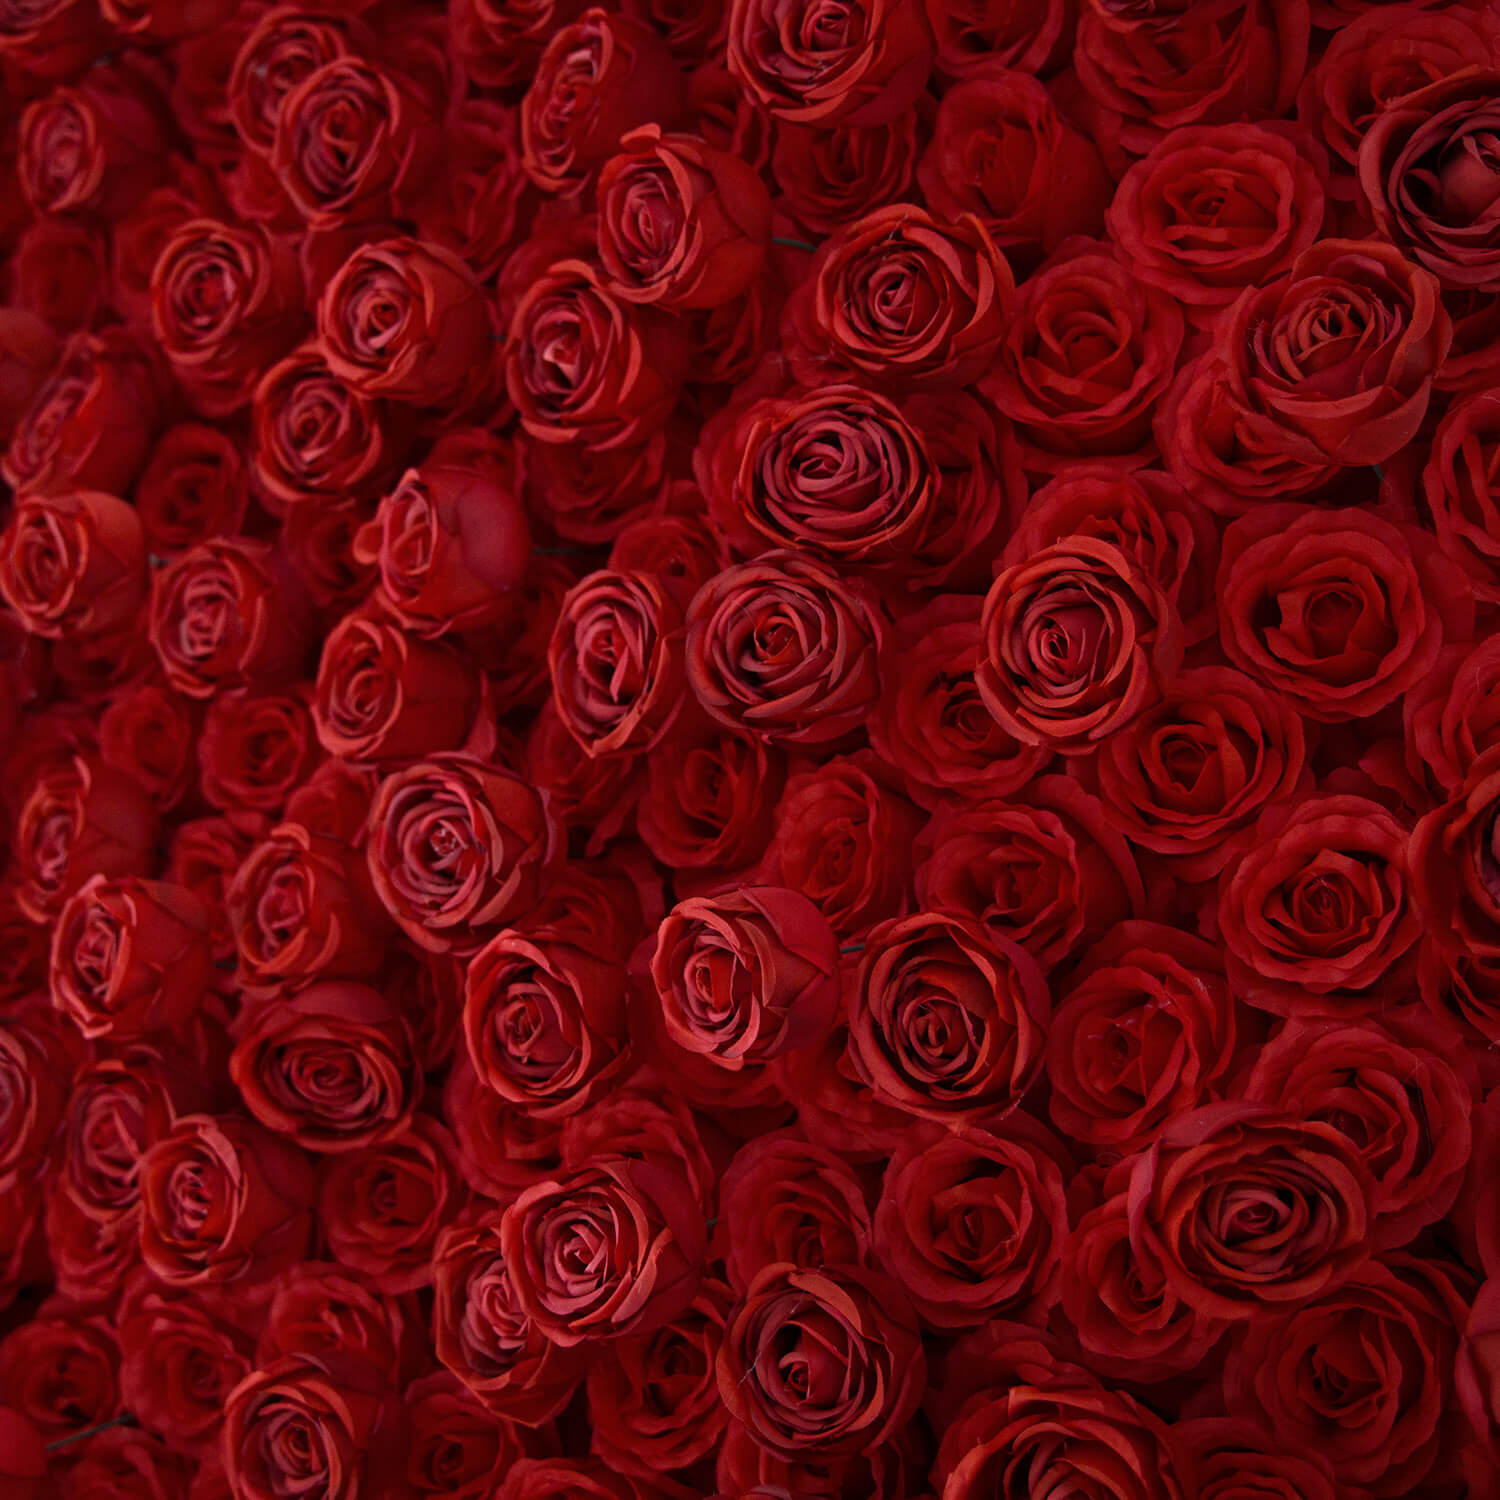 Red Roses Fabric Flower Wall For Wedding Arrangement Romantic Atmosphere-ubackdrop